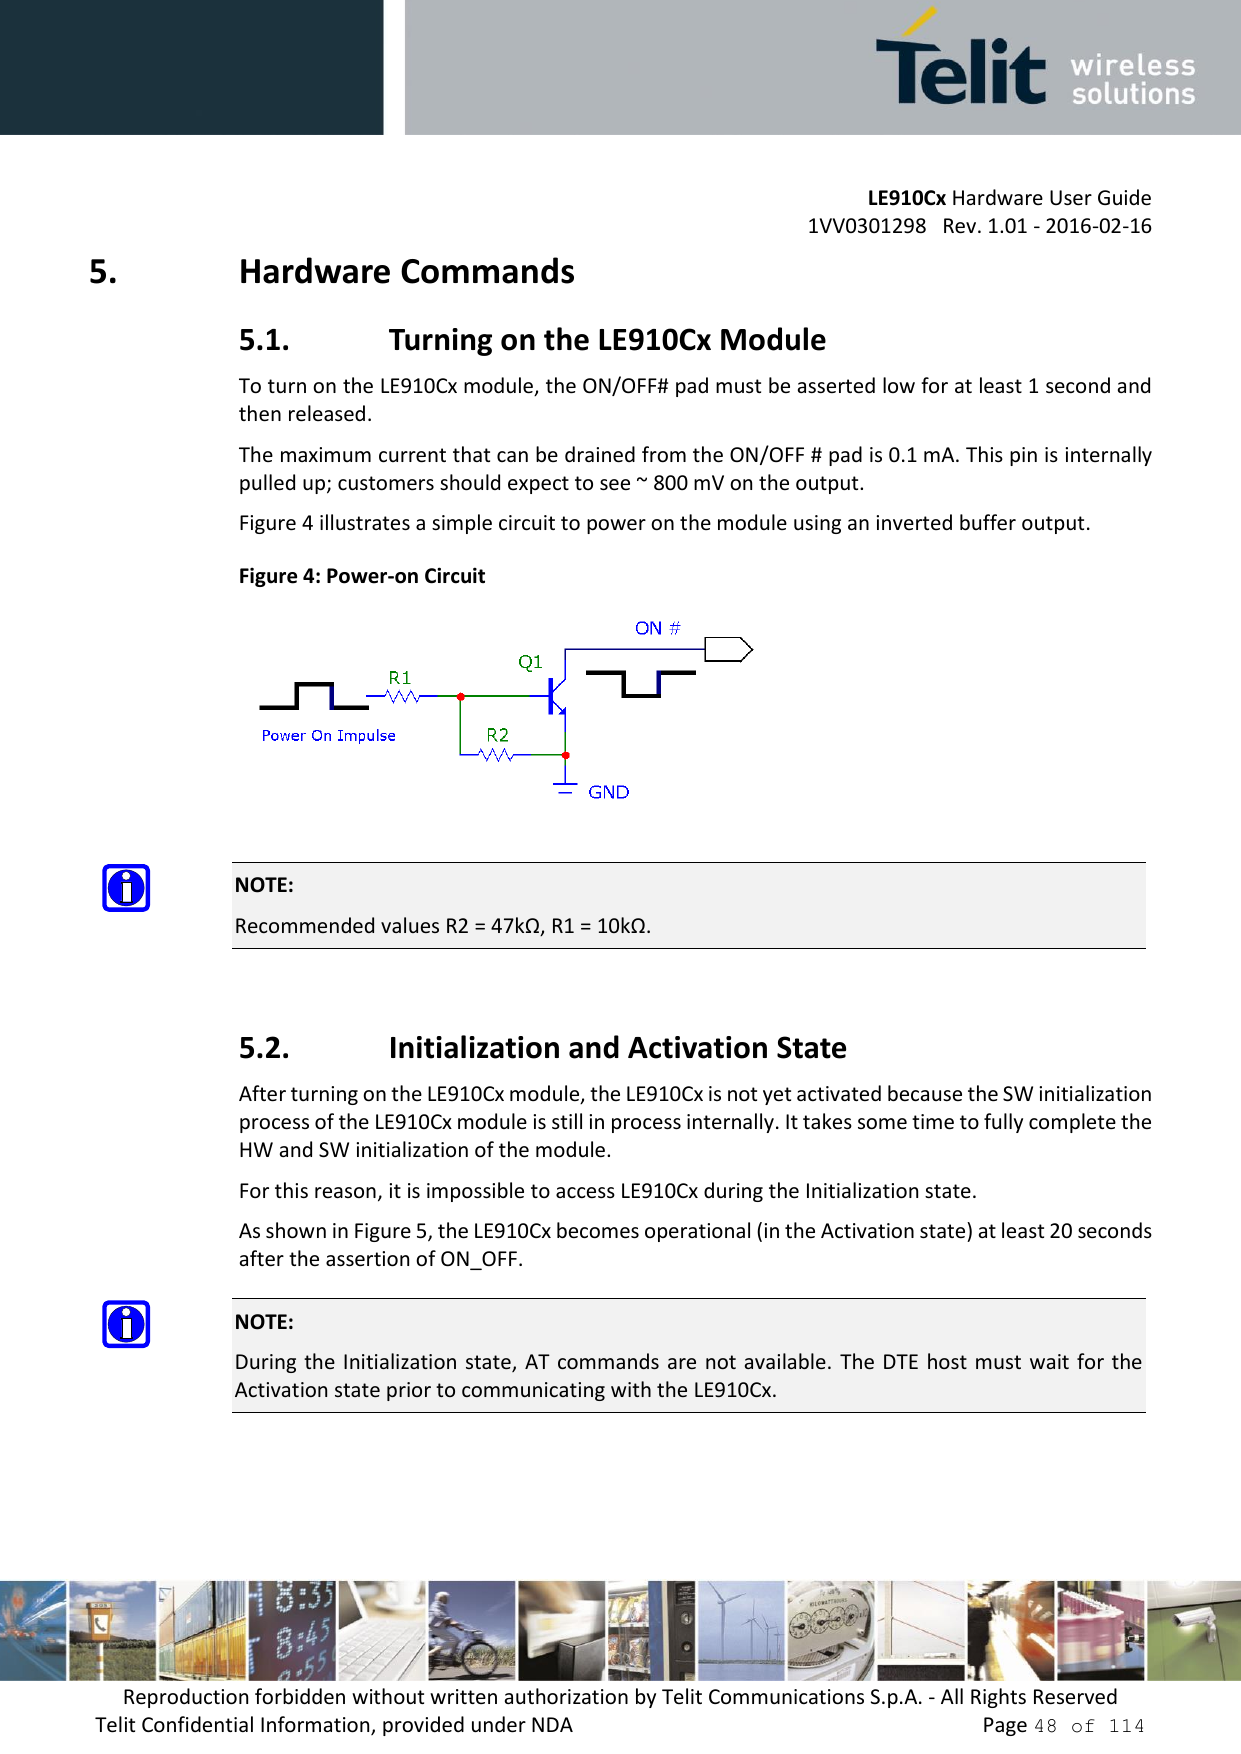         LE910Cx Hardware User Guide     1VV0301298   Rev. 1.01 - 2016-02-16 Reproduction forbidden without written authorization by Telit Communications S.p.A. - All Rights Reserved Telit Confidential Information, provided under NDA                 Page 48 of 114 5. Hardware Commands 5.1. Turning on the LE910Cx Module To turn on the LE910Cx module, the ON/OFF# pad must be asserted low for at least 1 second and then released. The maximum current that can be drained from the ON/OFF # pad is 0.1 mA. This pin is internally pulled up; customers should expect to see ~ 800 mV on the output. Figure 4 illustrates a simple circuit to power on the module using an inverted buffer output. Figure 4: Power-on Circuit   NOTE: Recommended values R2 = 47kΩ, R1 = 10kΩ.  5.2. Initialization and Activation State After turning on the LE910Cx module, the LE910Cx is not yet activated because the SW initialization process of the LE910Cx module is still in process internally. It takes some time to fully complete the HW and SW initialization of the module. For this reason, it is impossible to access LE910Cx during the Initialization state. As shown in Figure 5, the LE910Cx becomes operational (in the Activation state) at least 20 seconds after the assertion of ON_OFF.  NOTE: During the  Initialization state, AT commands are not available.  The DTE host must wait for the Activation state prior to communicating with the LE910Cx.  